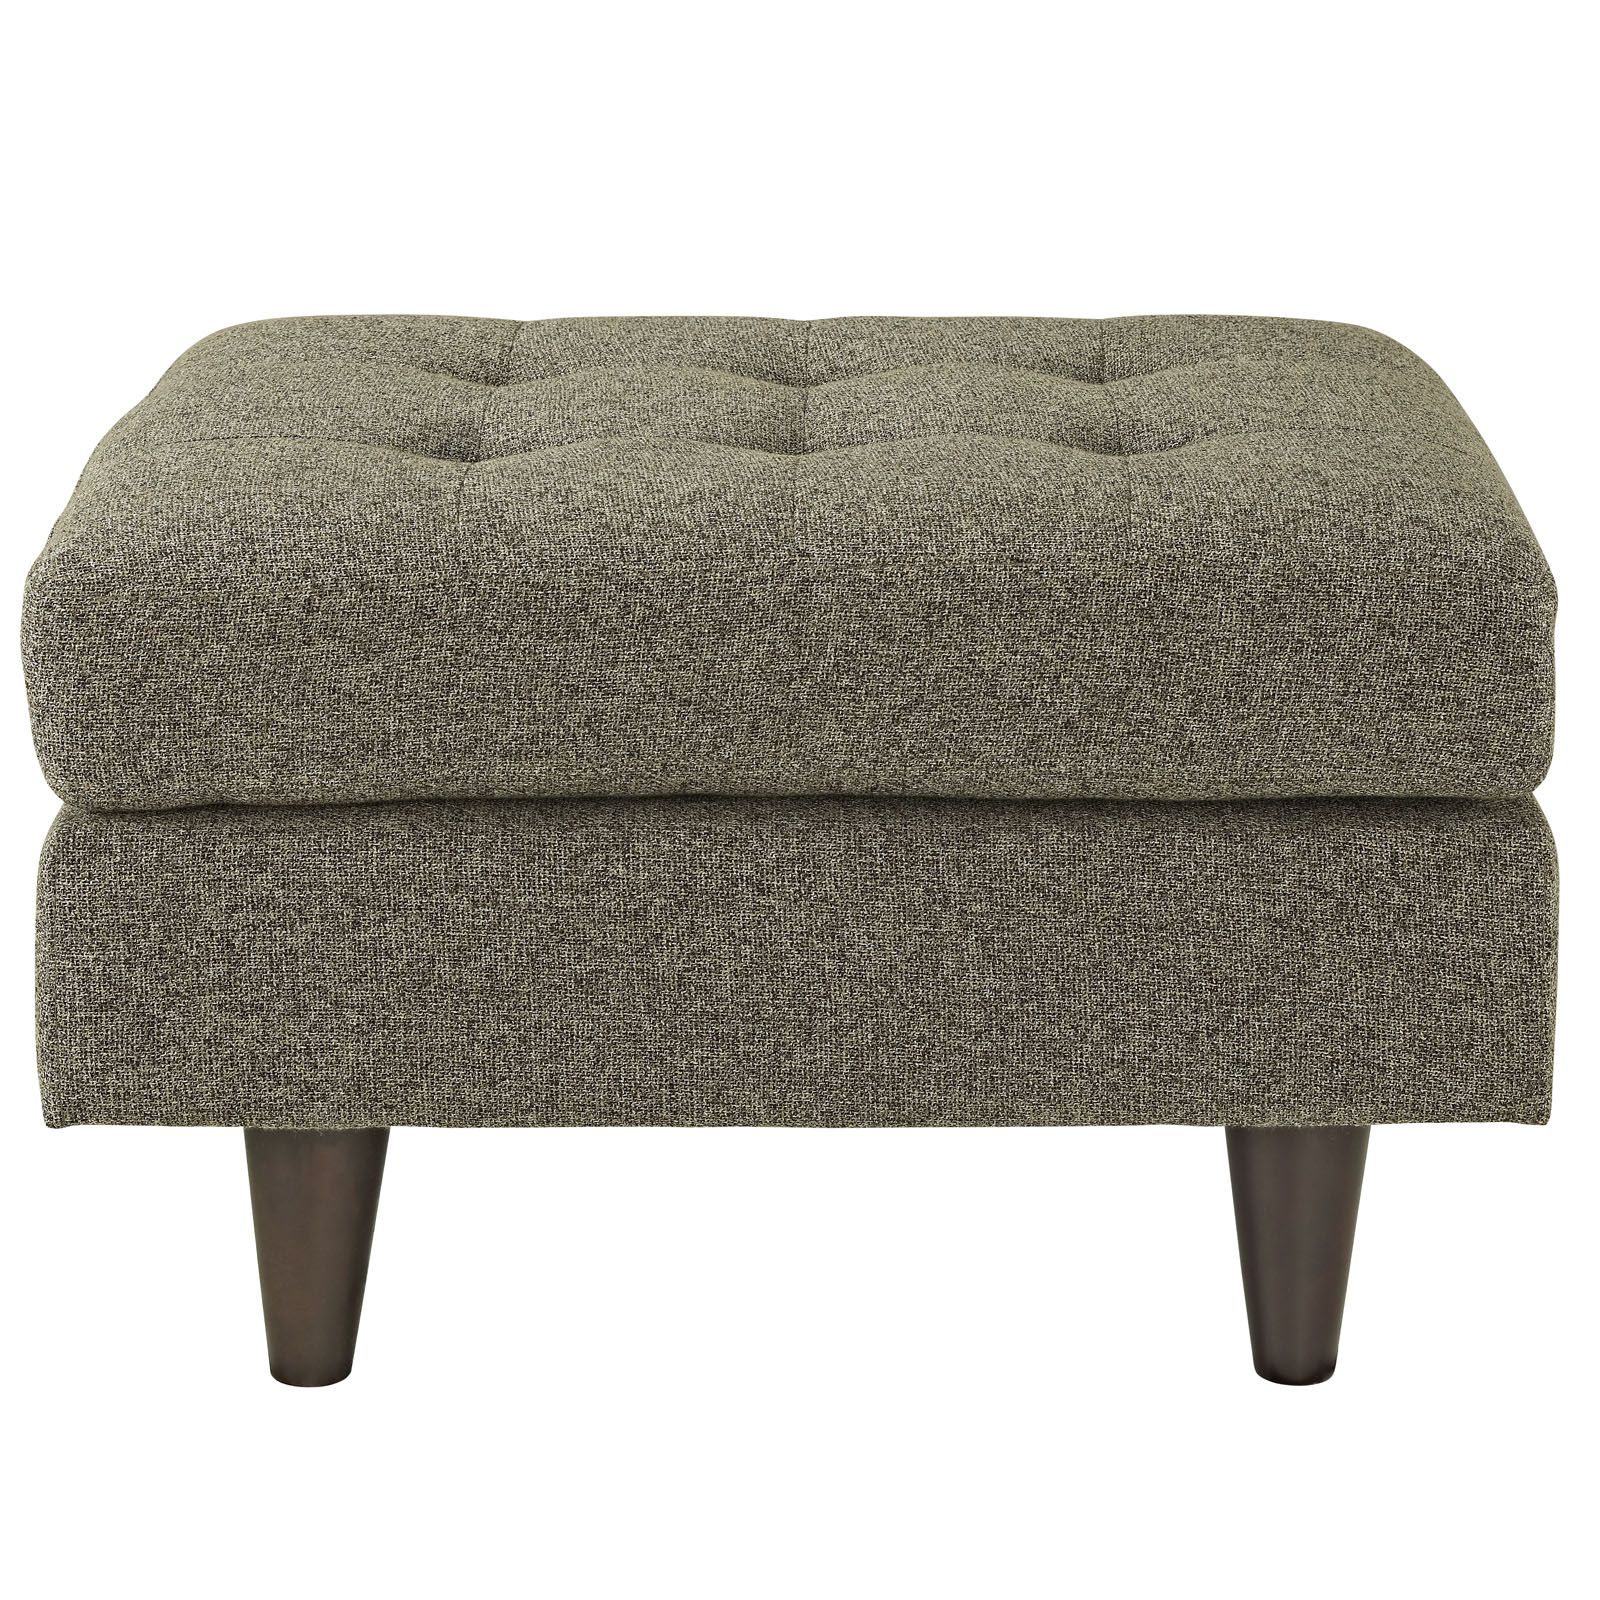 Navy Cotton Woven Pouf Ottomans Throughout Latest Empress Upholstered Fabric Ottoman – Azure (View 2 of 10)